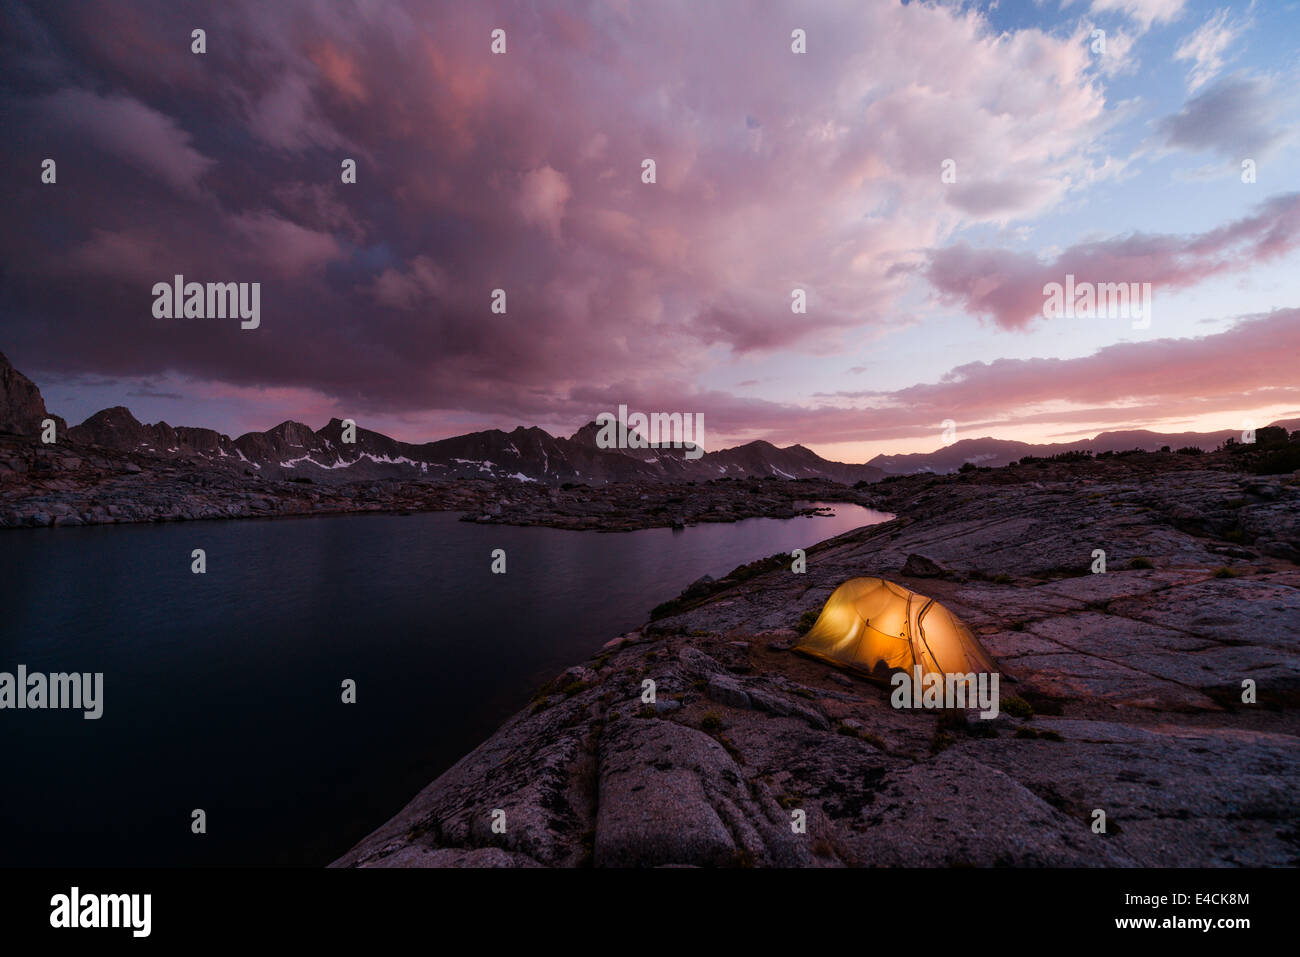 Big Agnes Fly creek tent pitched in the Dusy Basin of California's High Sierra Mountain range near a lake at sunset. Stock Photo